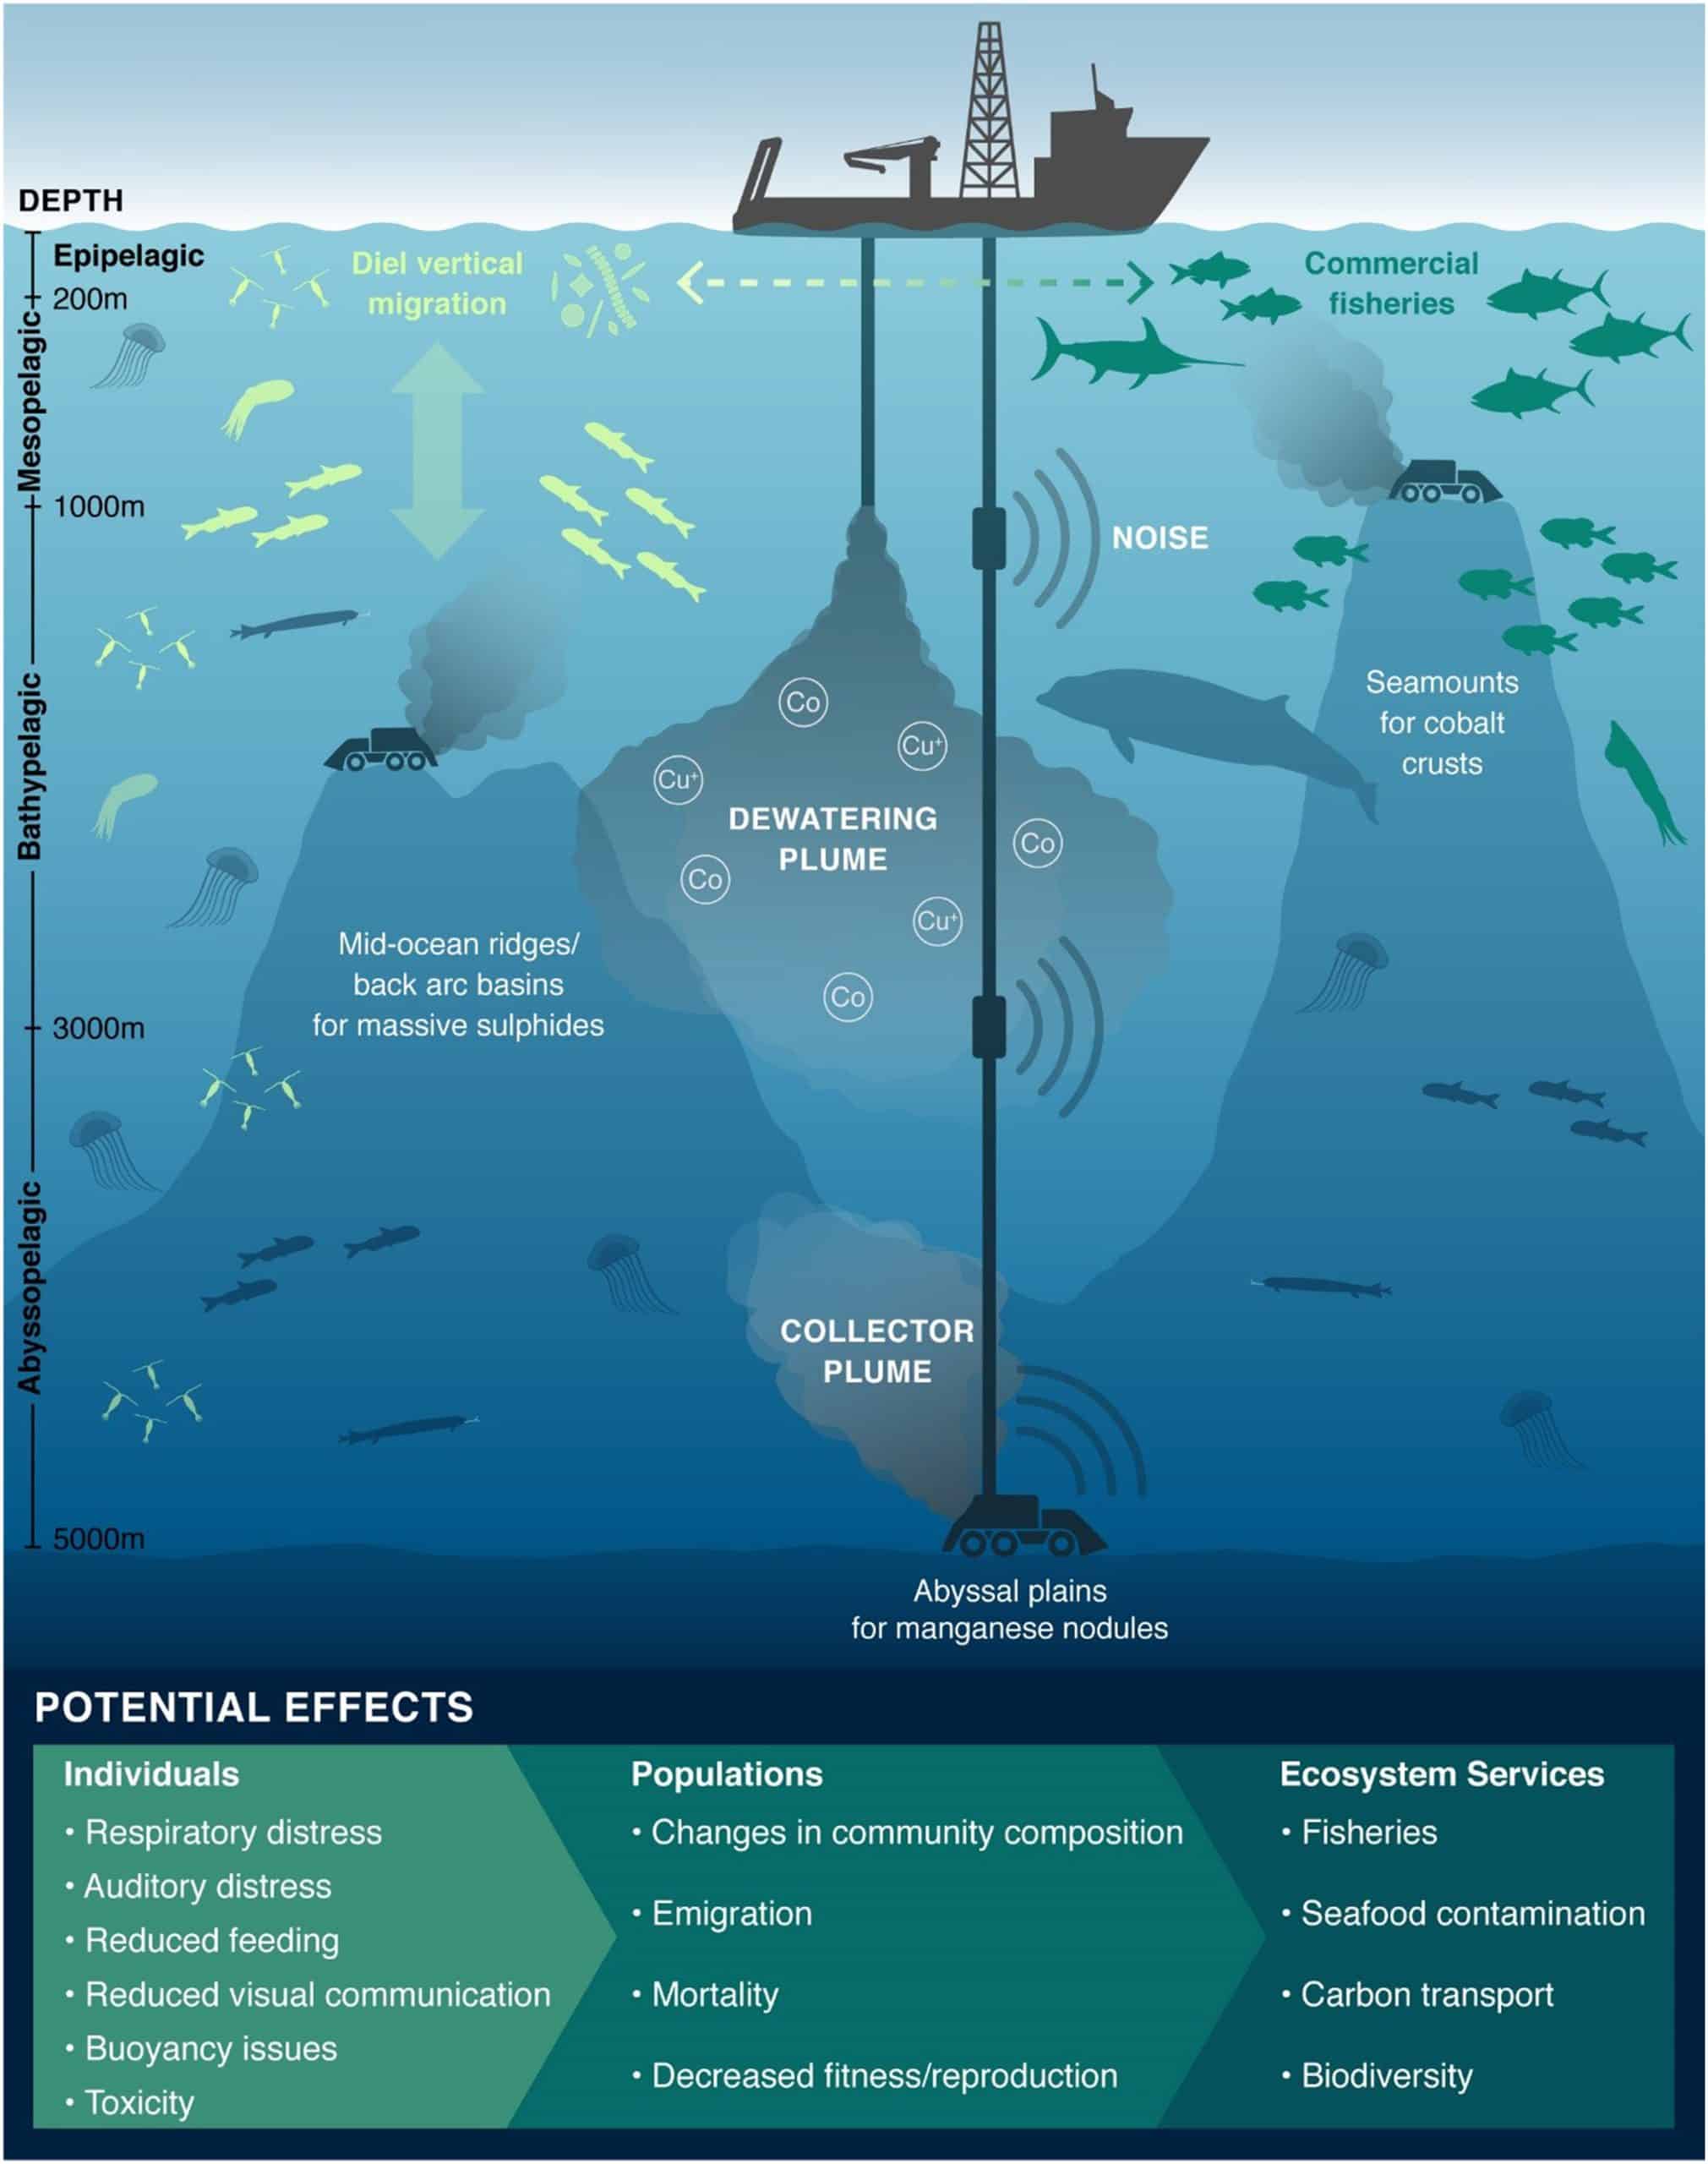 Mining-generated sediment plumes and noise have a variety of possible effects on pelagic taxa. (Organisms and plume impacts are not to scale.) Image credit: Amanda Dillon.